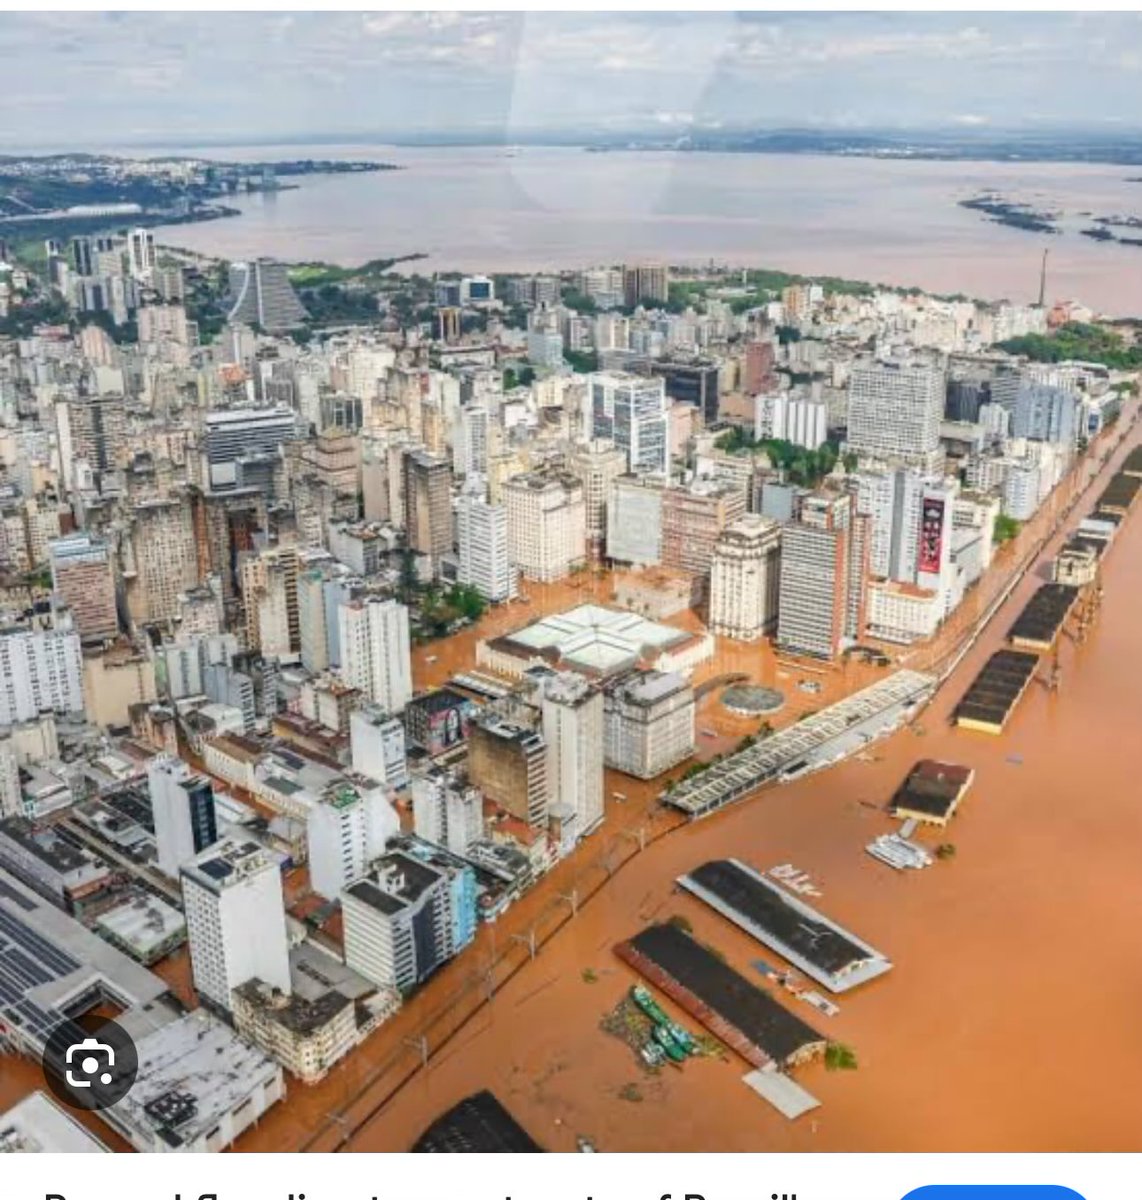 Looks like they build Porto Allegre on Riparian land 😬